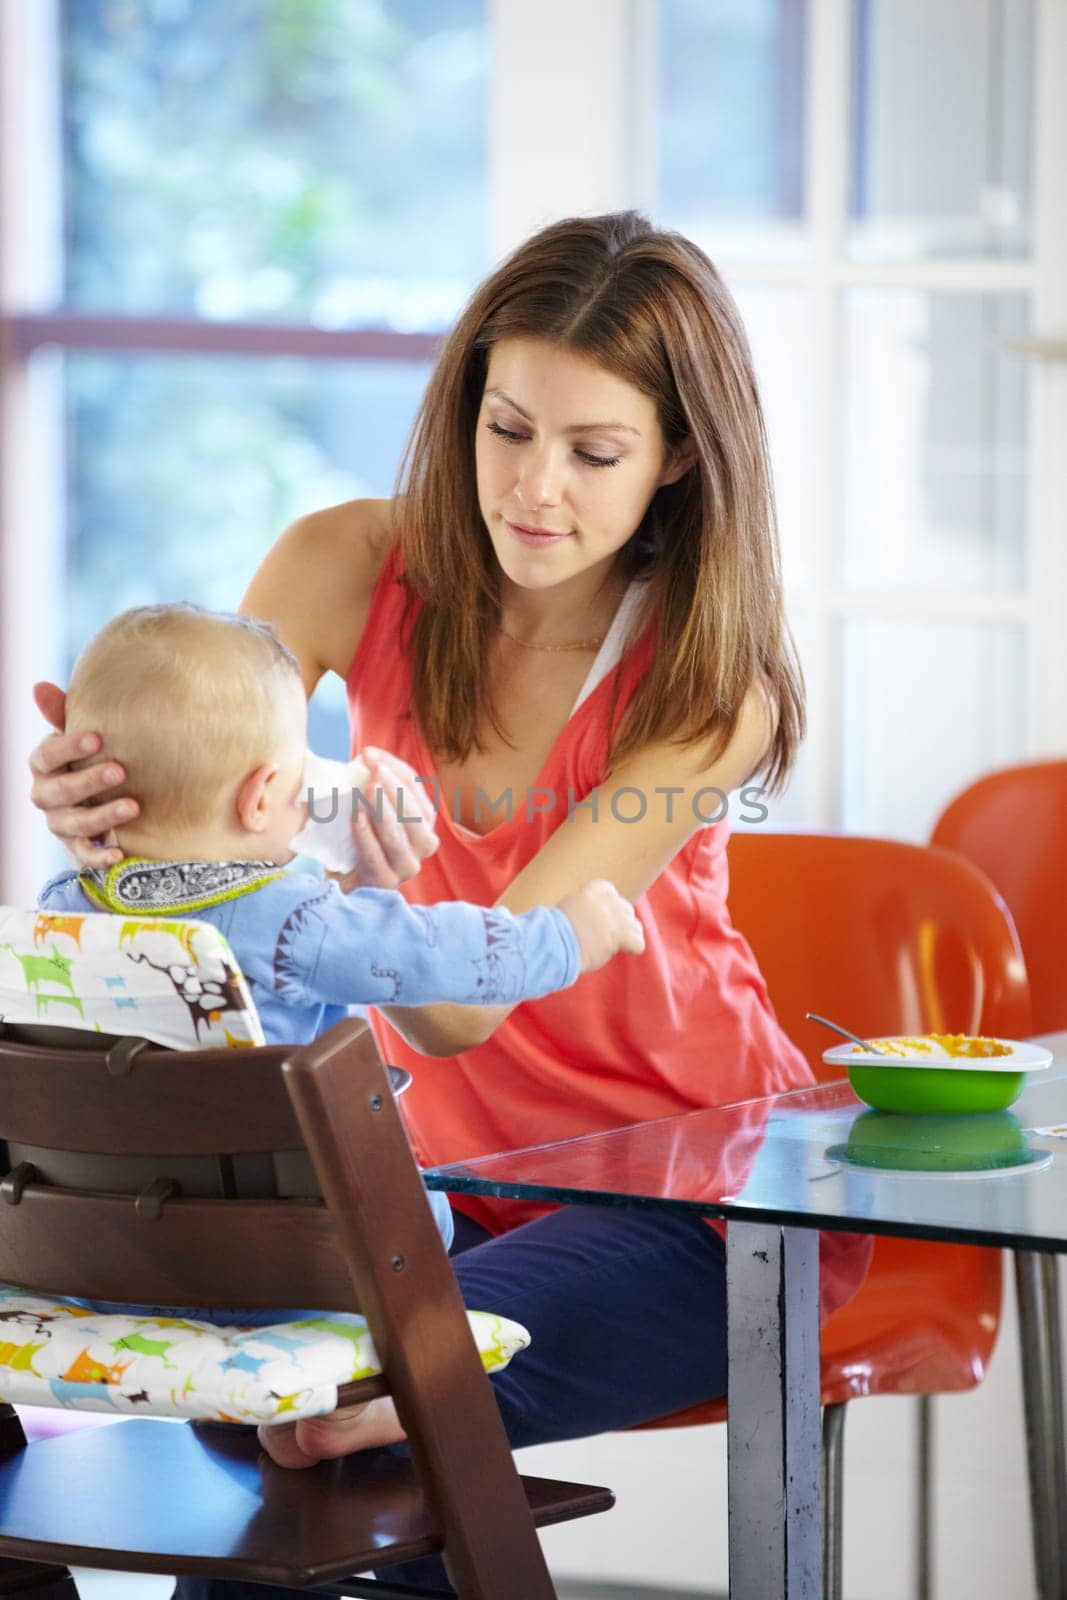 Mother, baby and food in feeding chair for nutrition, growth and development at table in kitchen of home. Woman, infant and cleaning face after eating, napkin and routine for love, care and nurture.